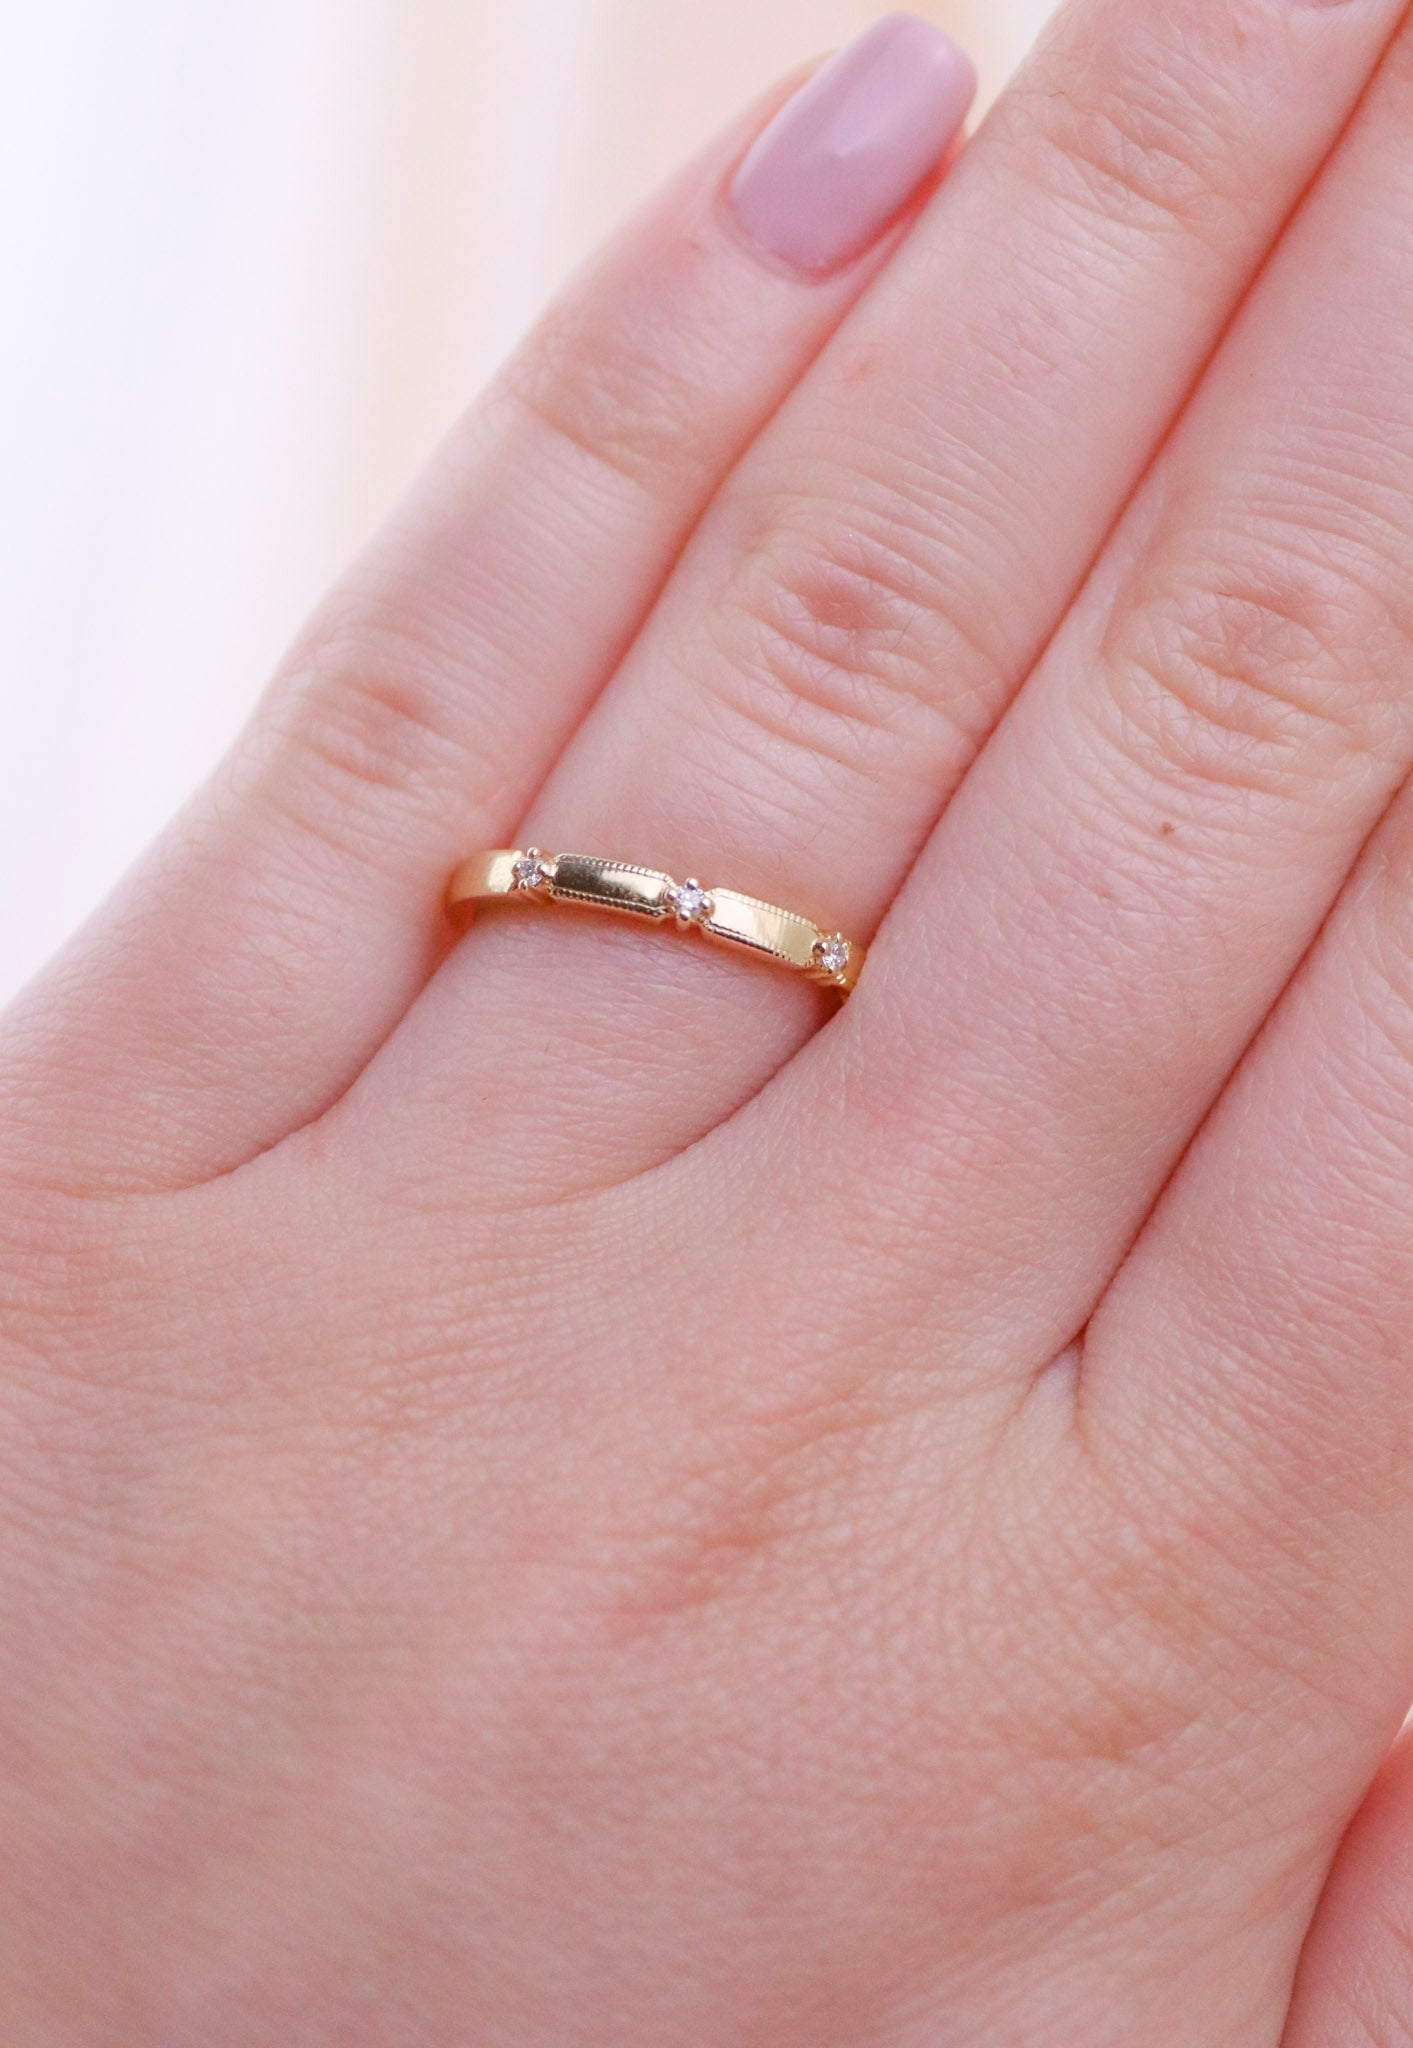 Simple Textured Gold Band with Diamond Accent - Kingdom Jewelry